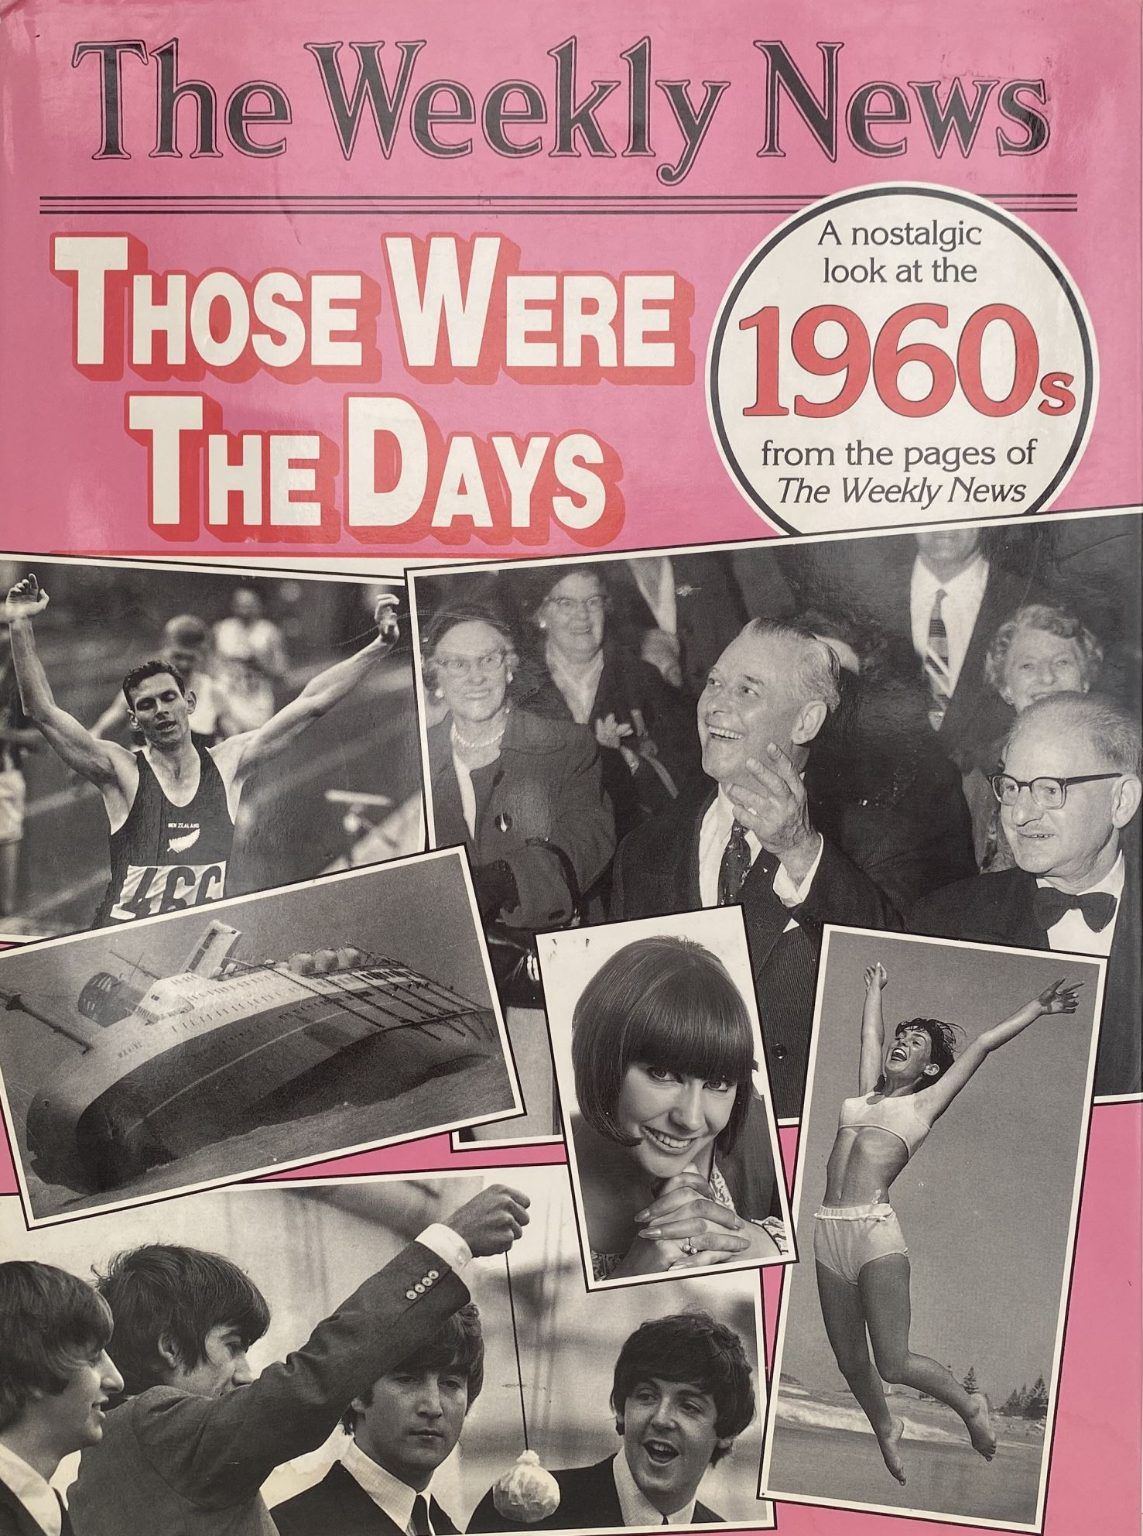 THOSE WERE THE DAYS: A nostalgic look at The Weekly News 1960s